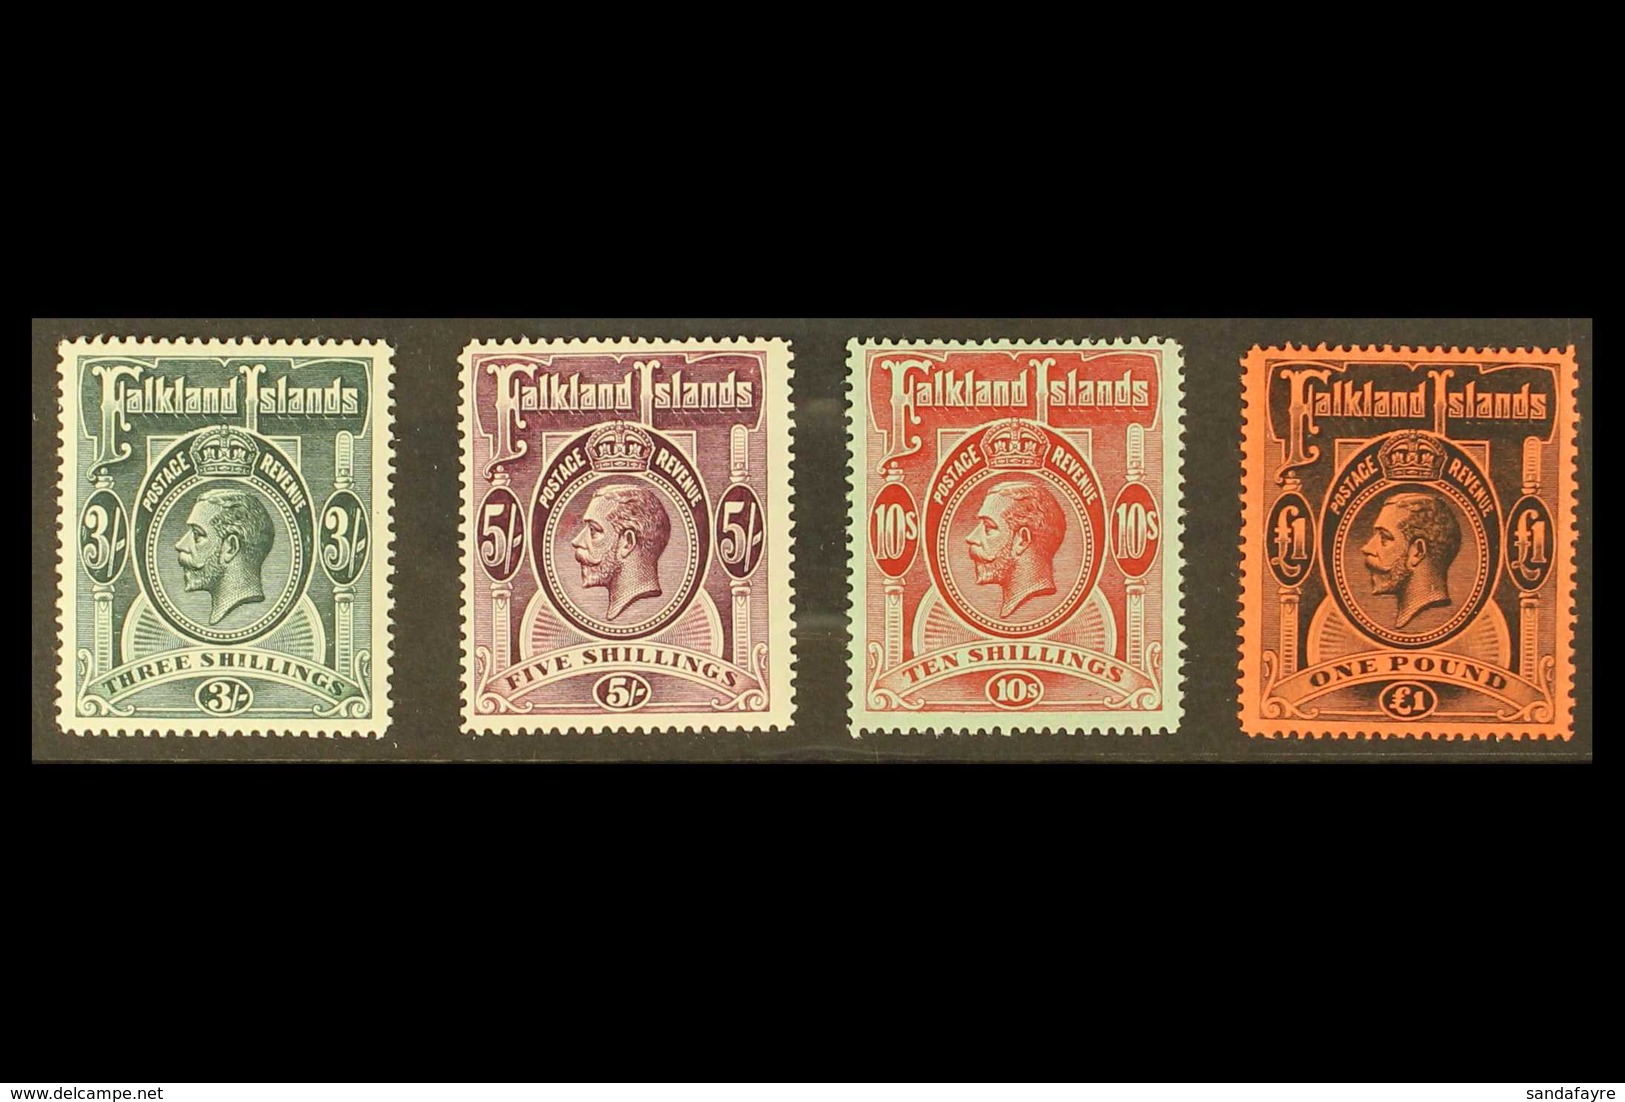 1912-20 KGV High Values, 3s To £1 (SG 66, 67b, 68 And 69), Fine/ Very Fine NEVER HINGED MINT. Attractive And Scarce! (4  - Islas Malvinas